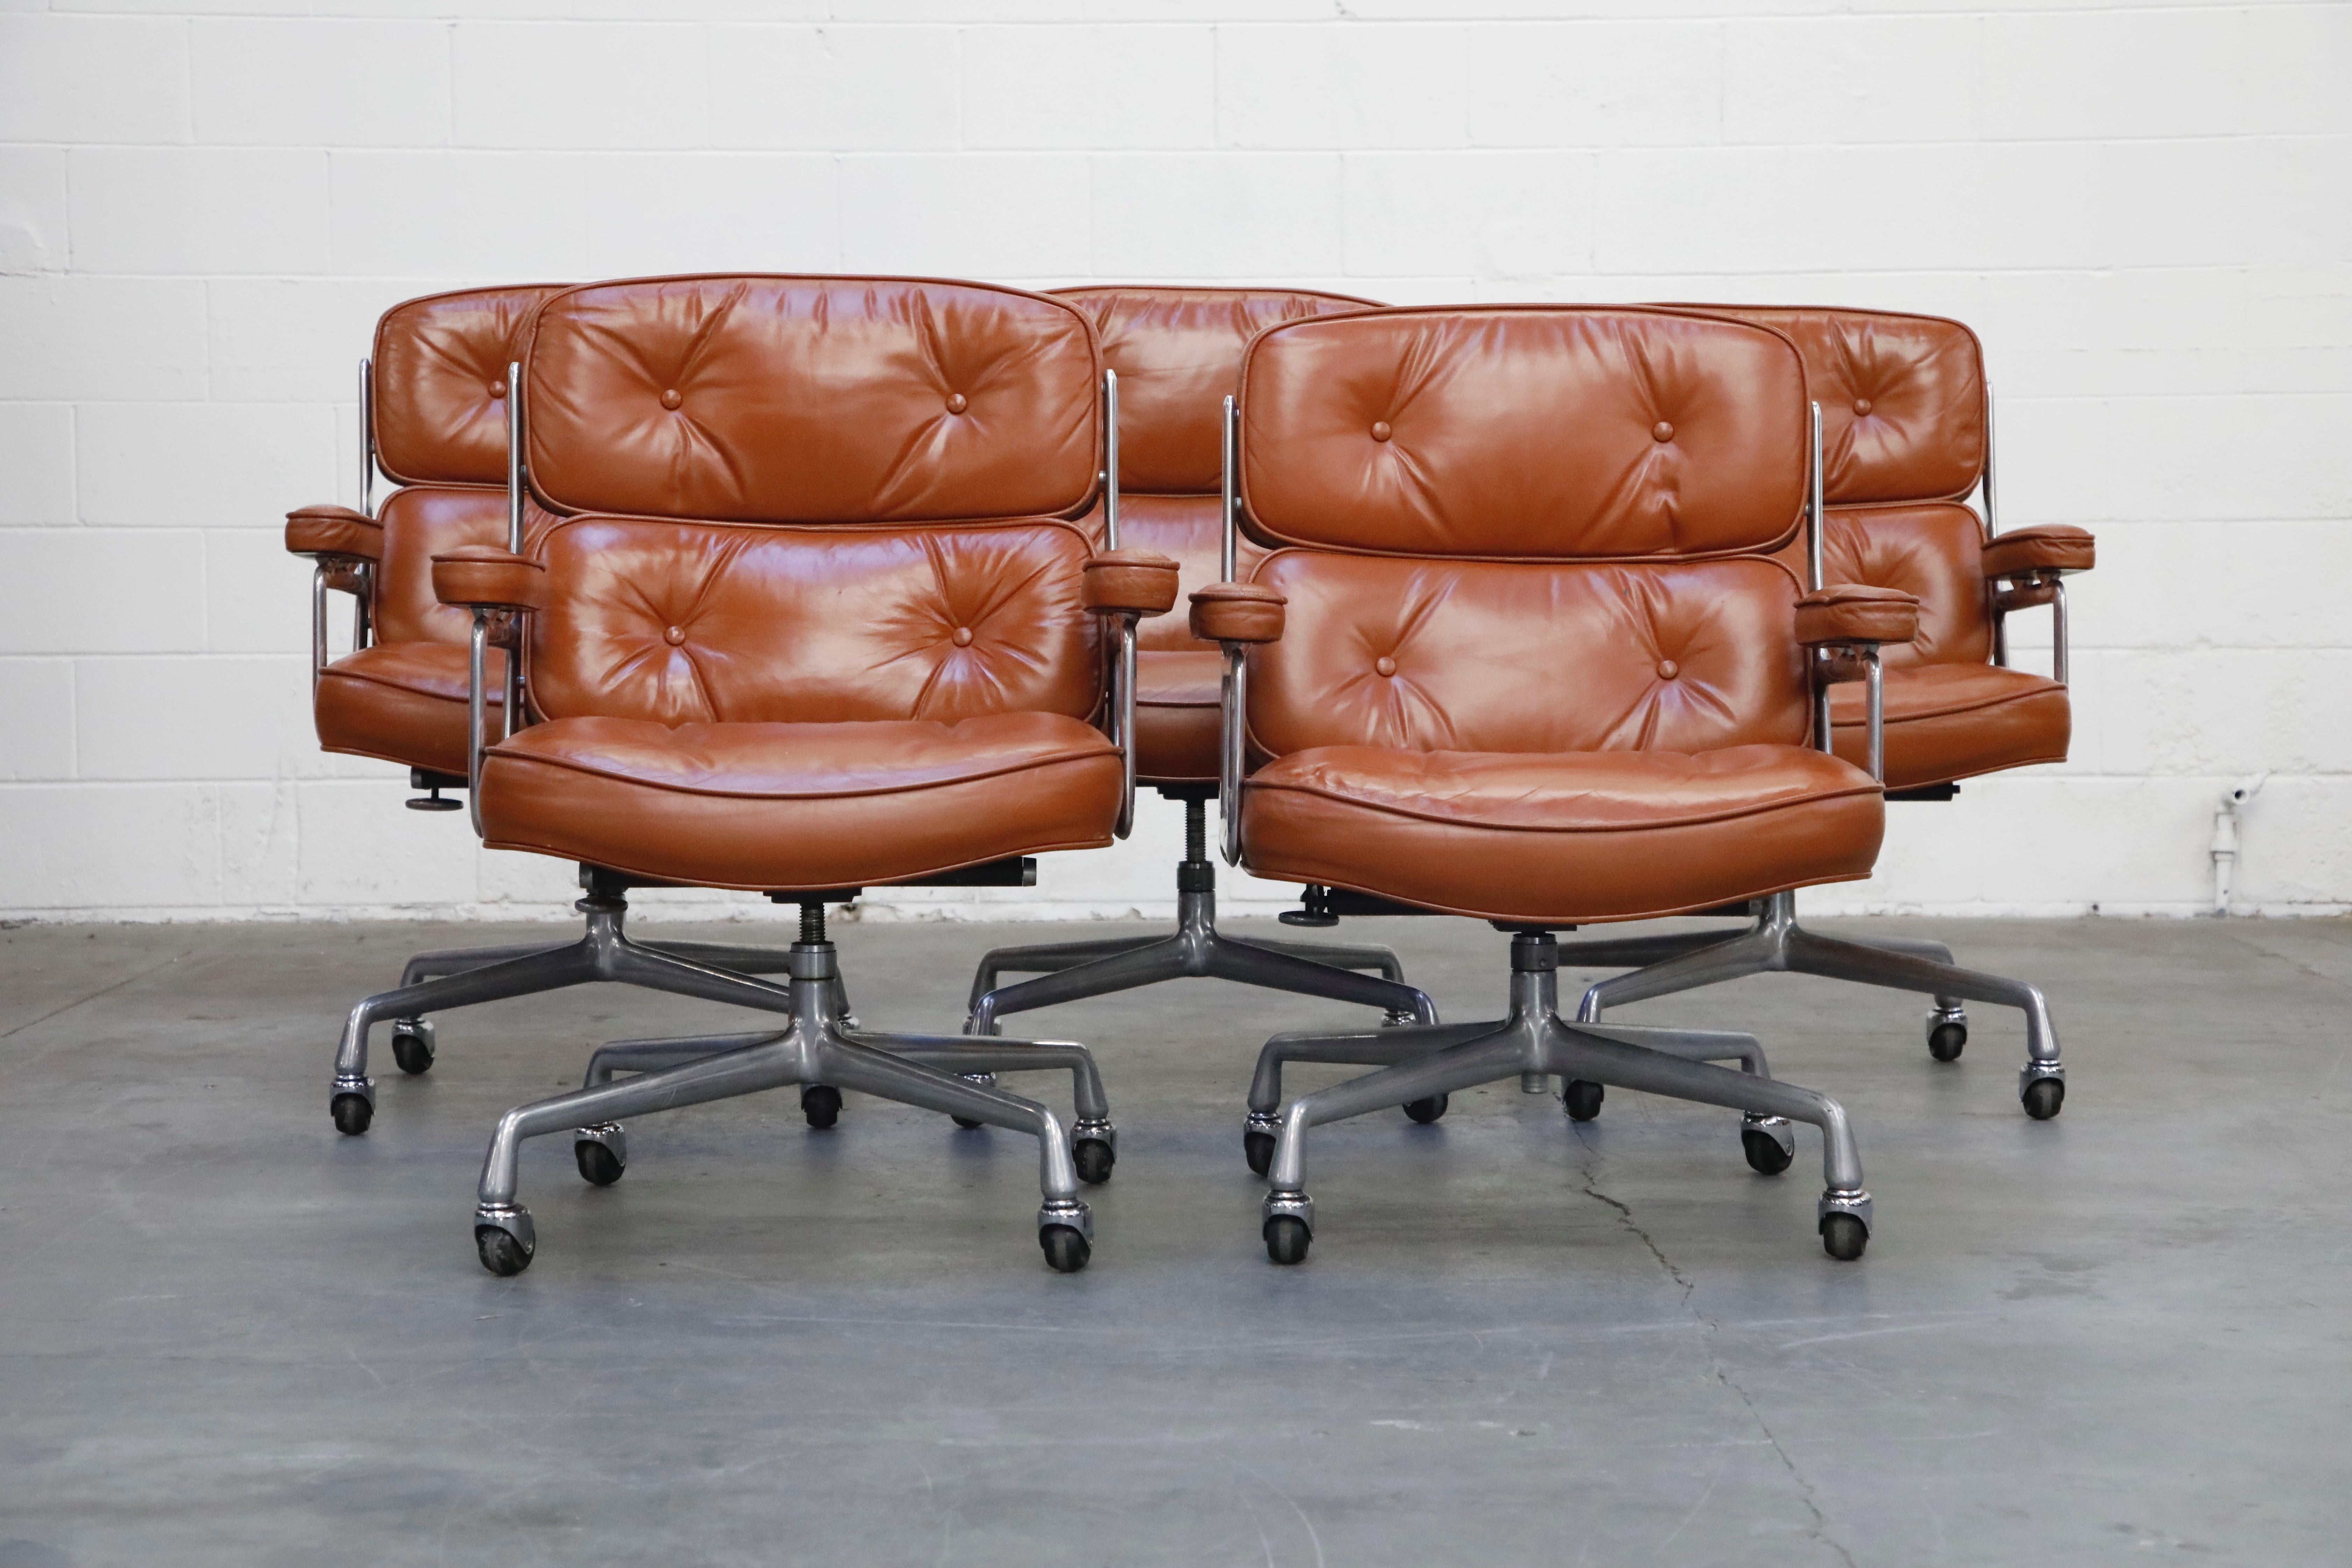 Late 20th Century 'Time Life' Executive Chairs by Charles Eames for Herman Miller, 1983, Signed